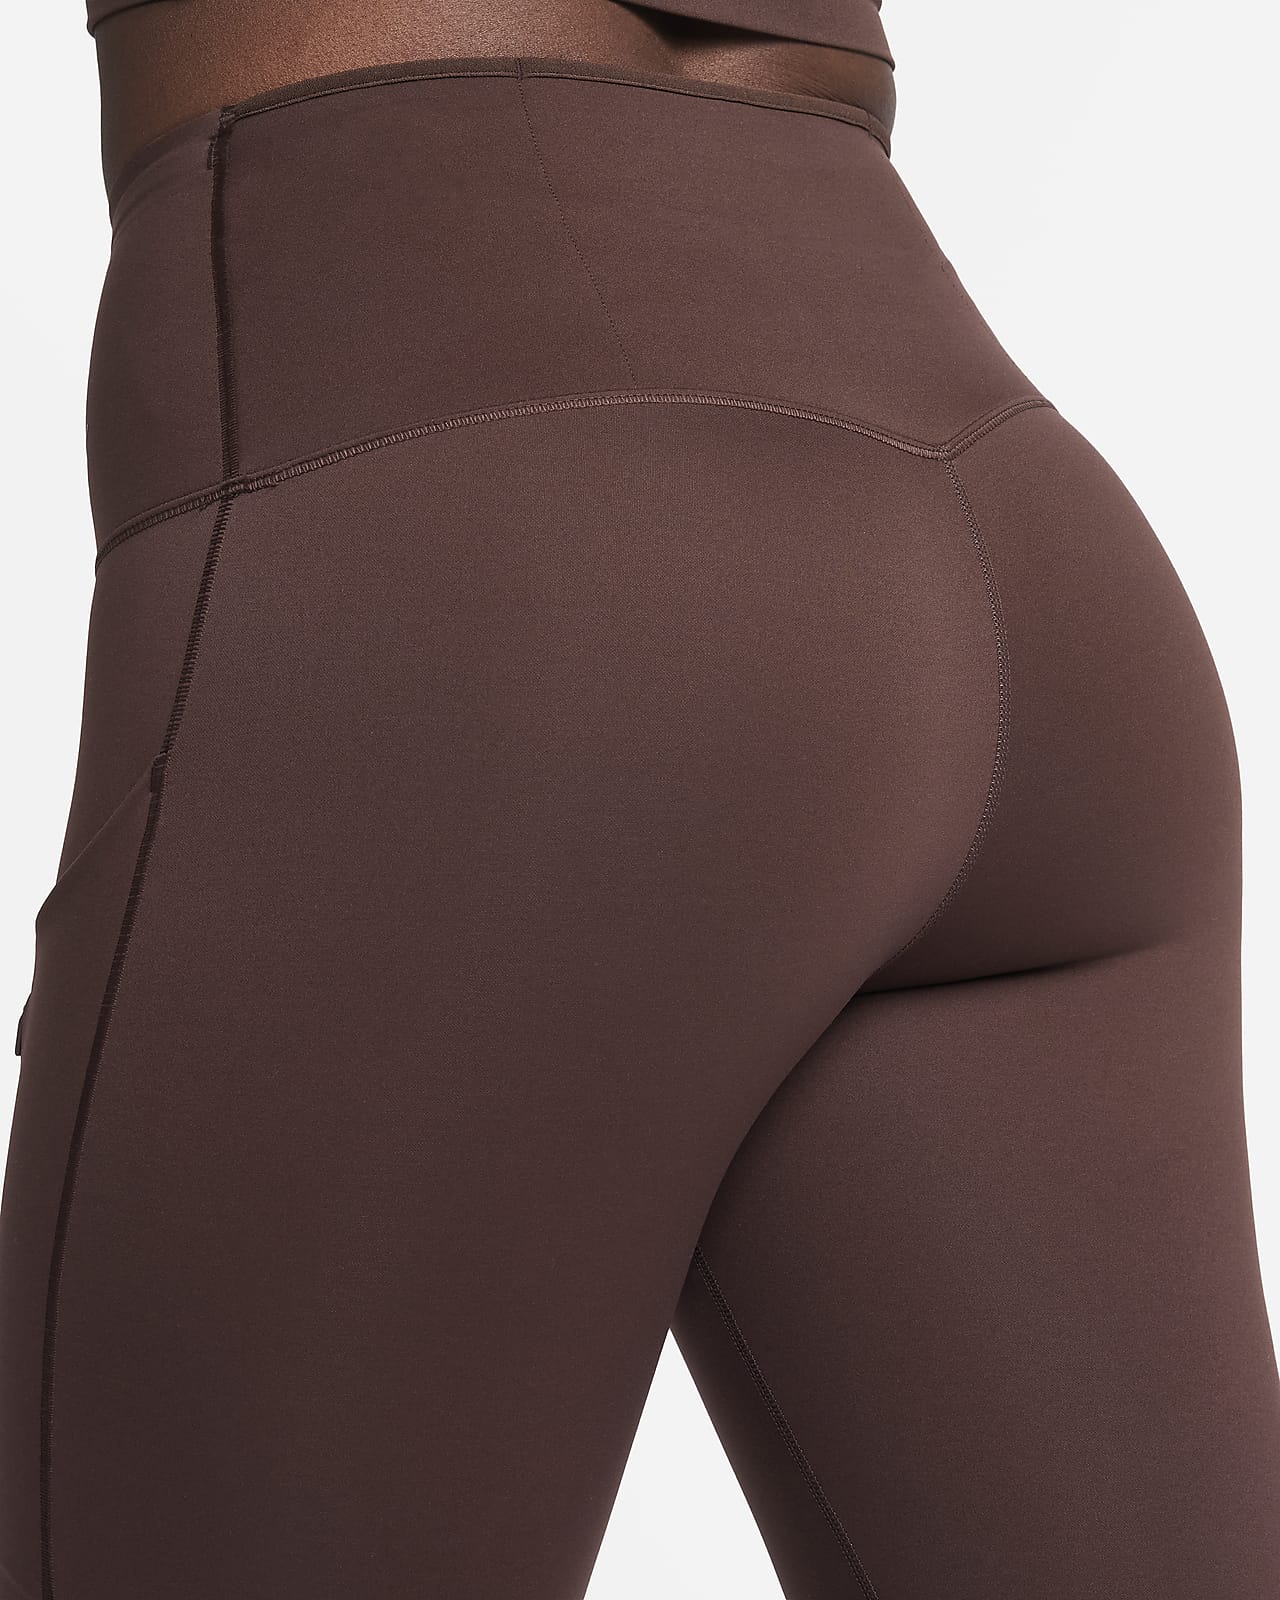 Nike Go Women's Therma-FIT High-Waisted 7/8 Leggings with Pockets.